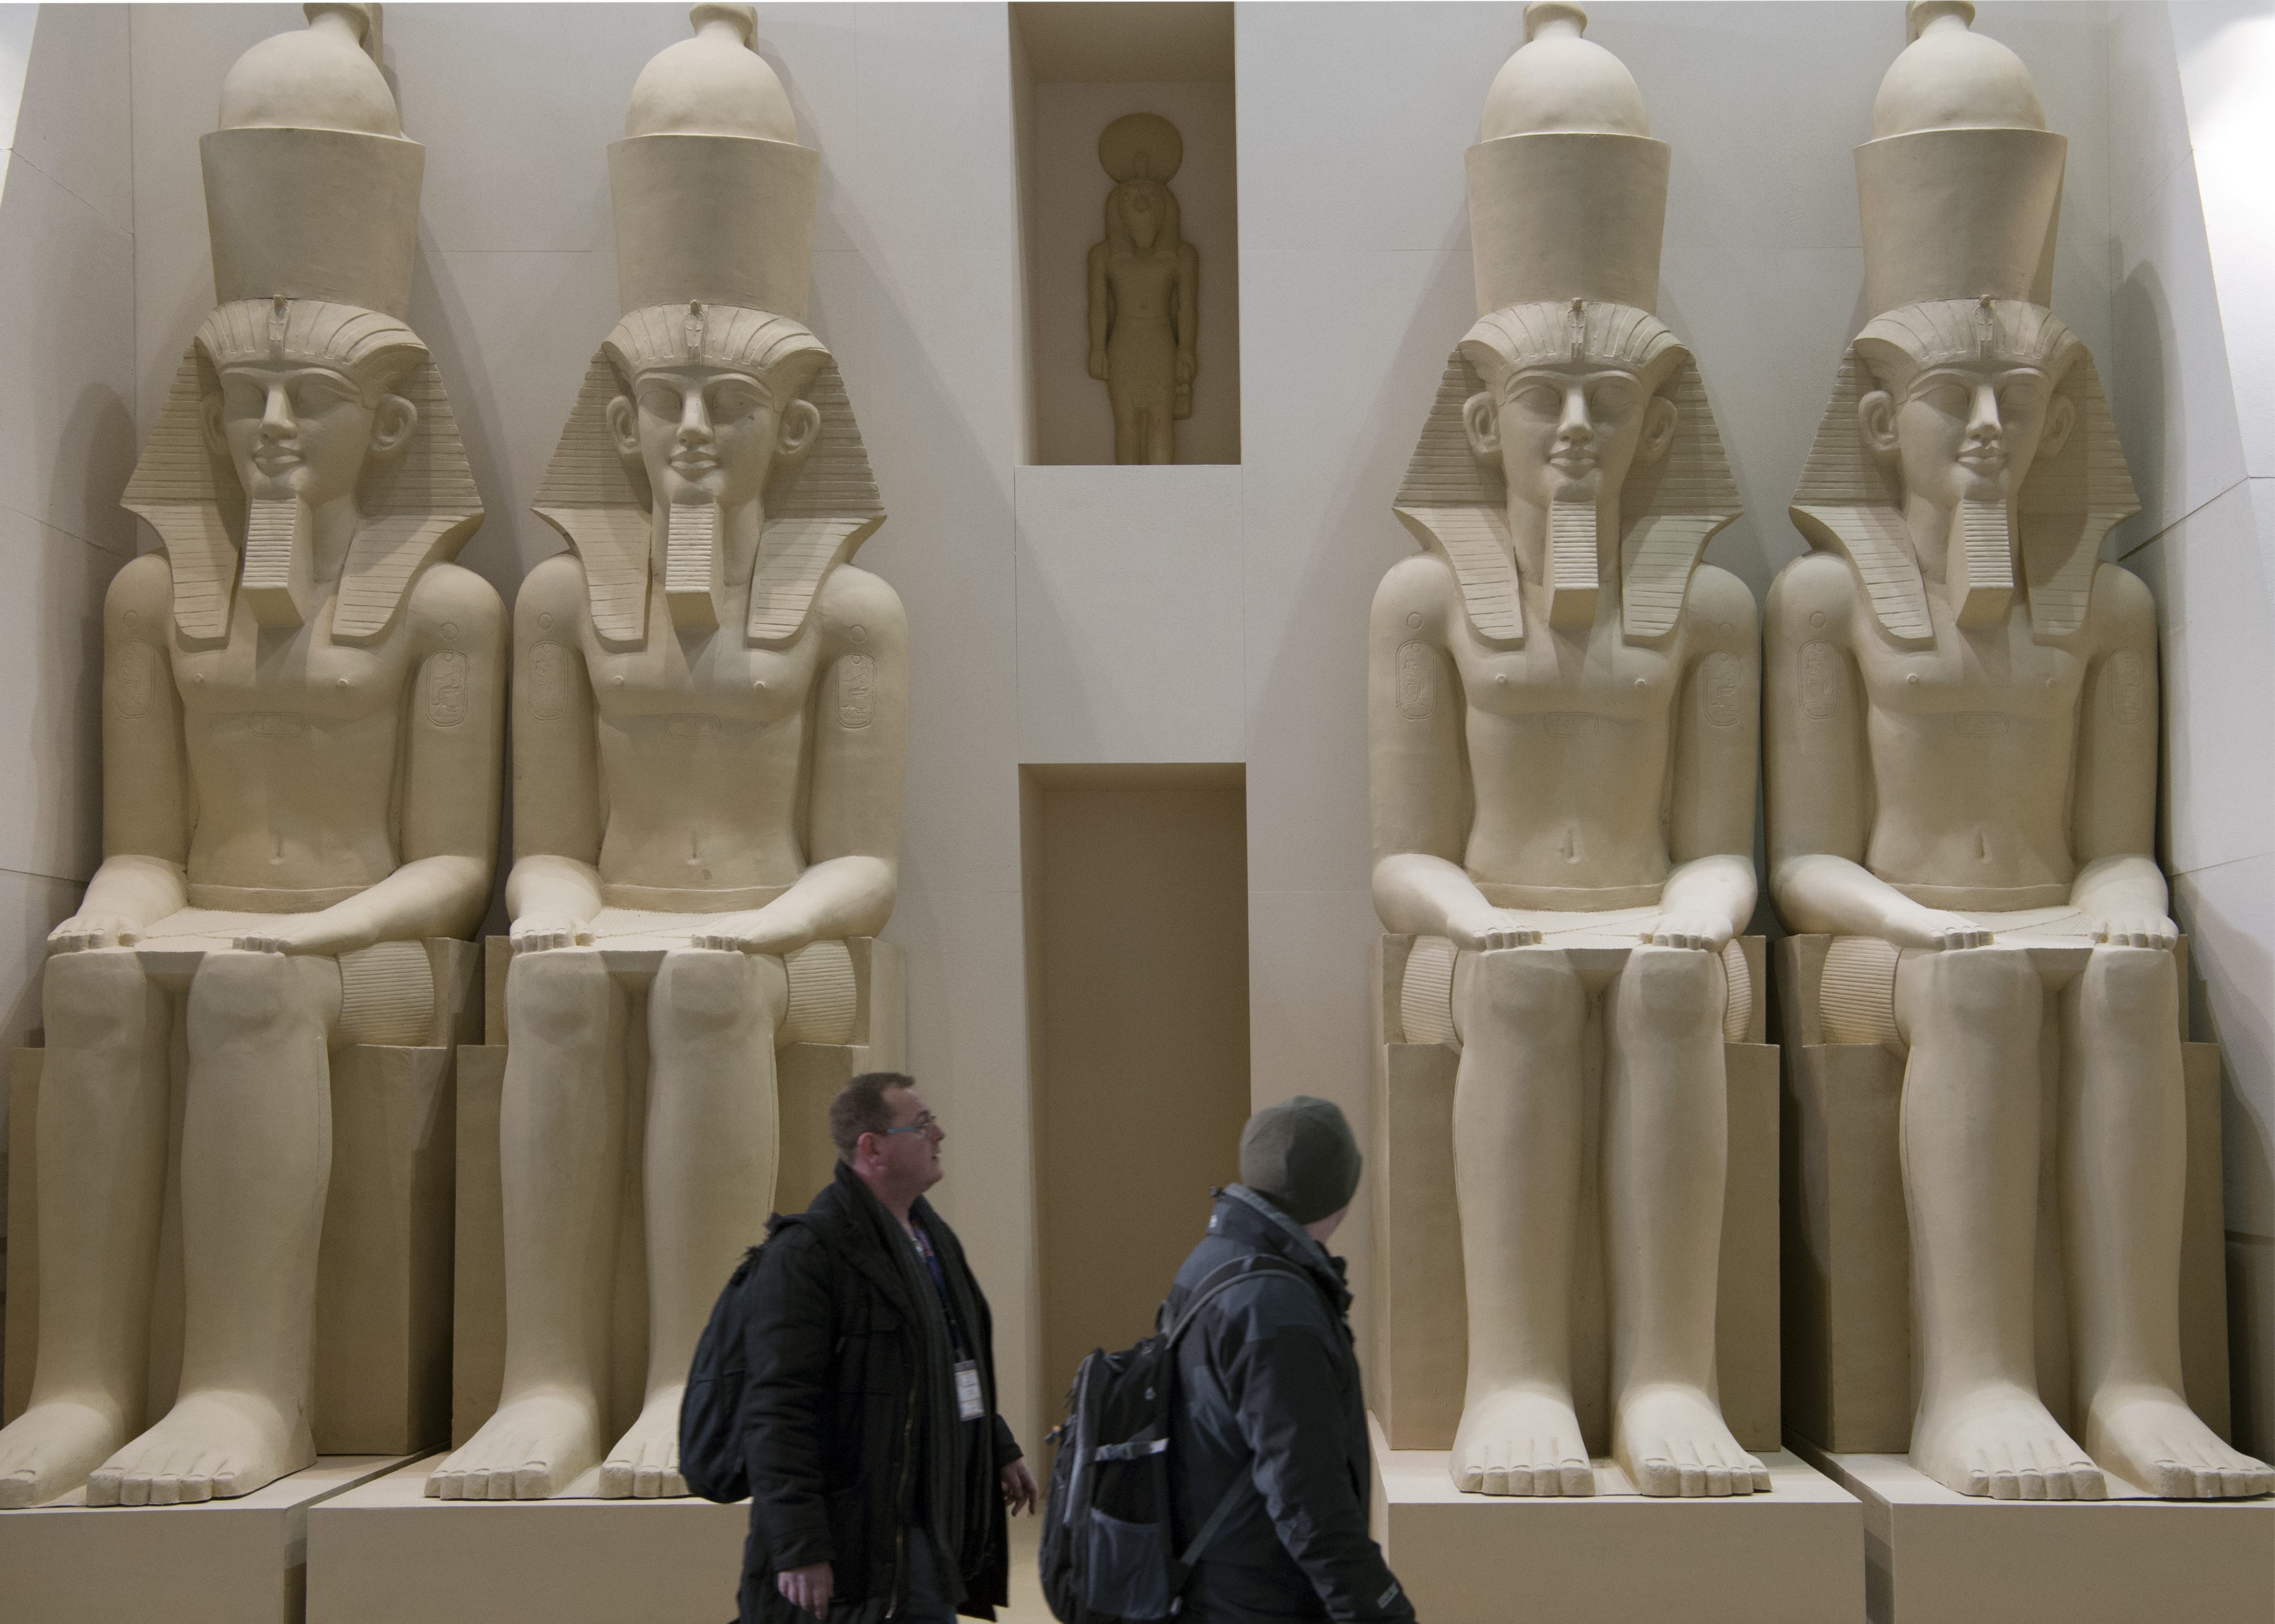 EGYPT BOOTH. Two men walk past statues at the ITB Berlin international travel trade show in Germany, March 9, 2016. Photo by Soeren Stache/EPA 